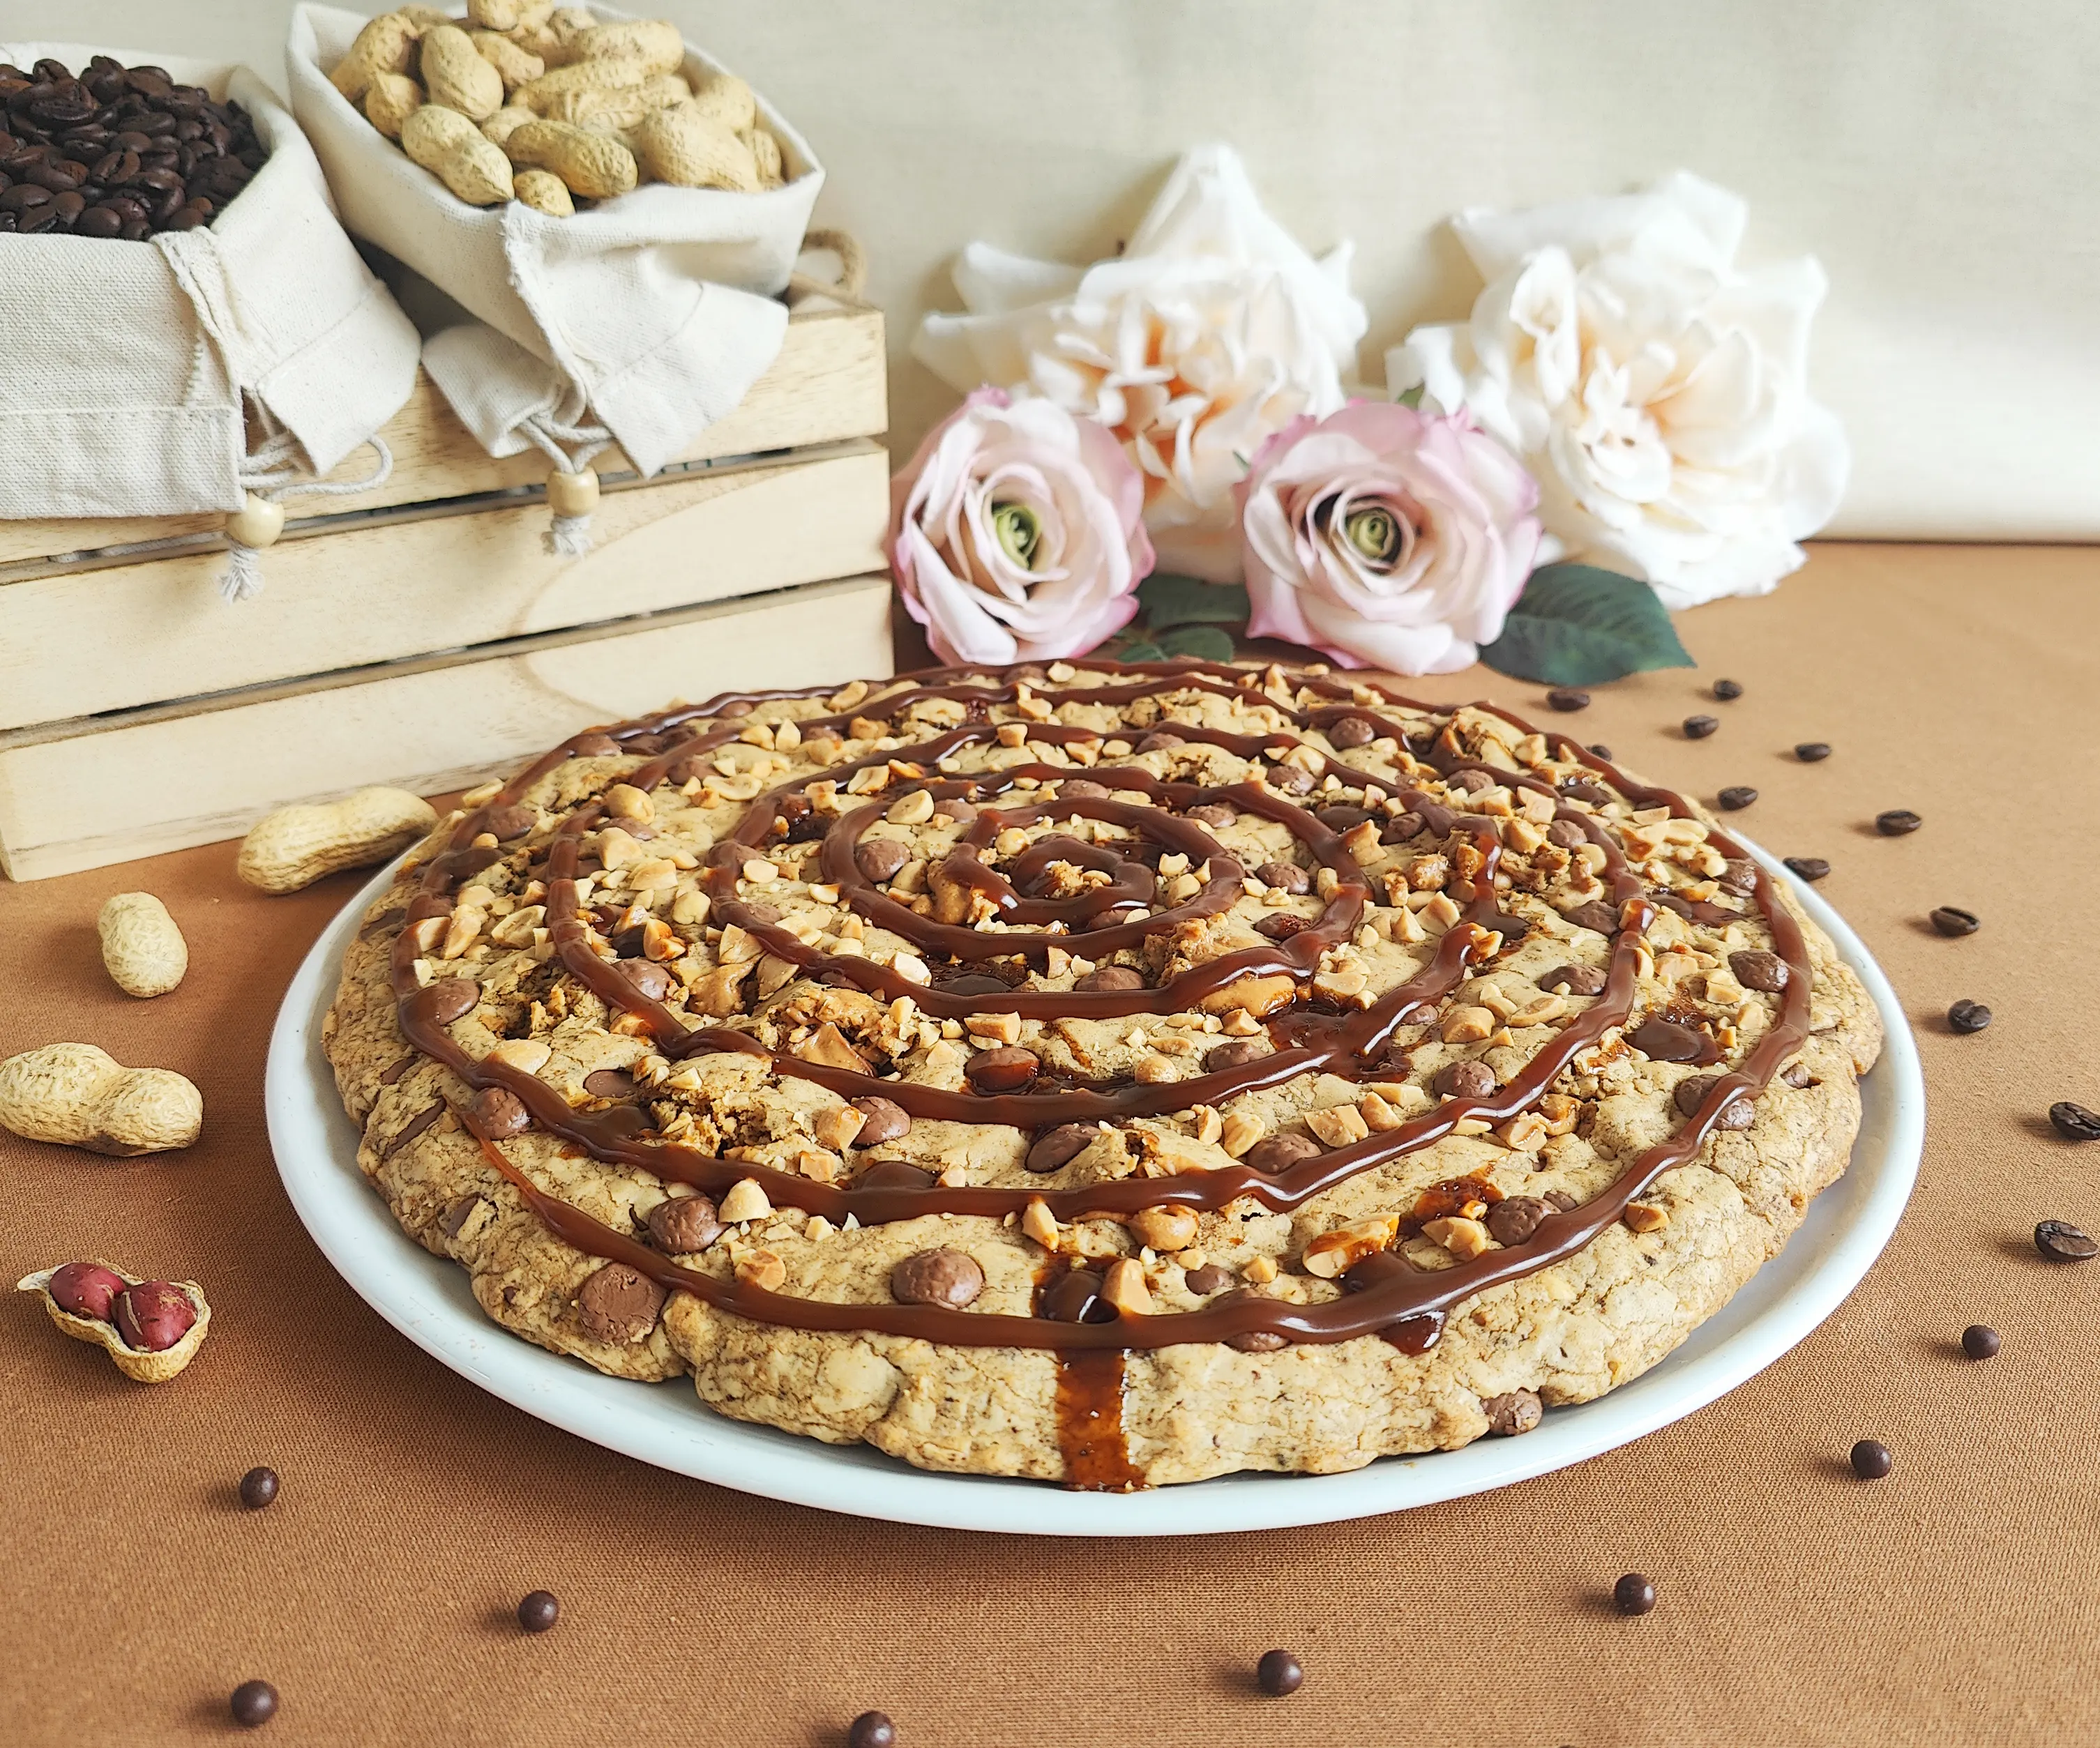 /assets/images/recipes/peanut-caramel-coffee-giant-cookie/1.webp